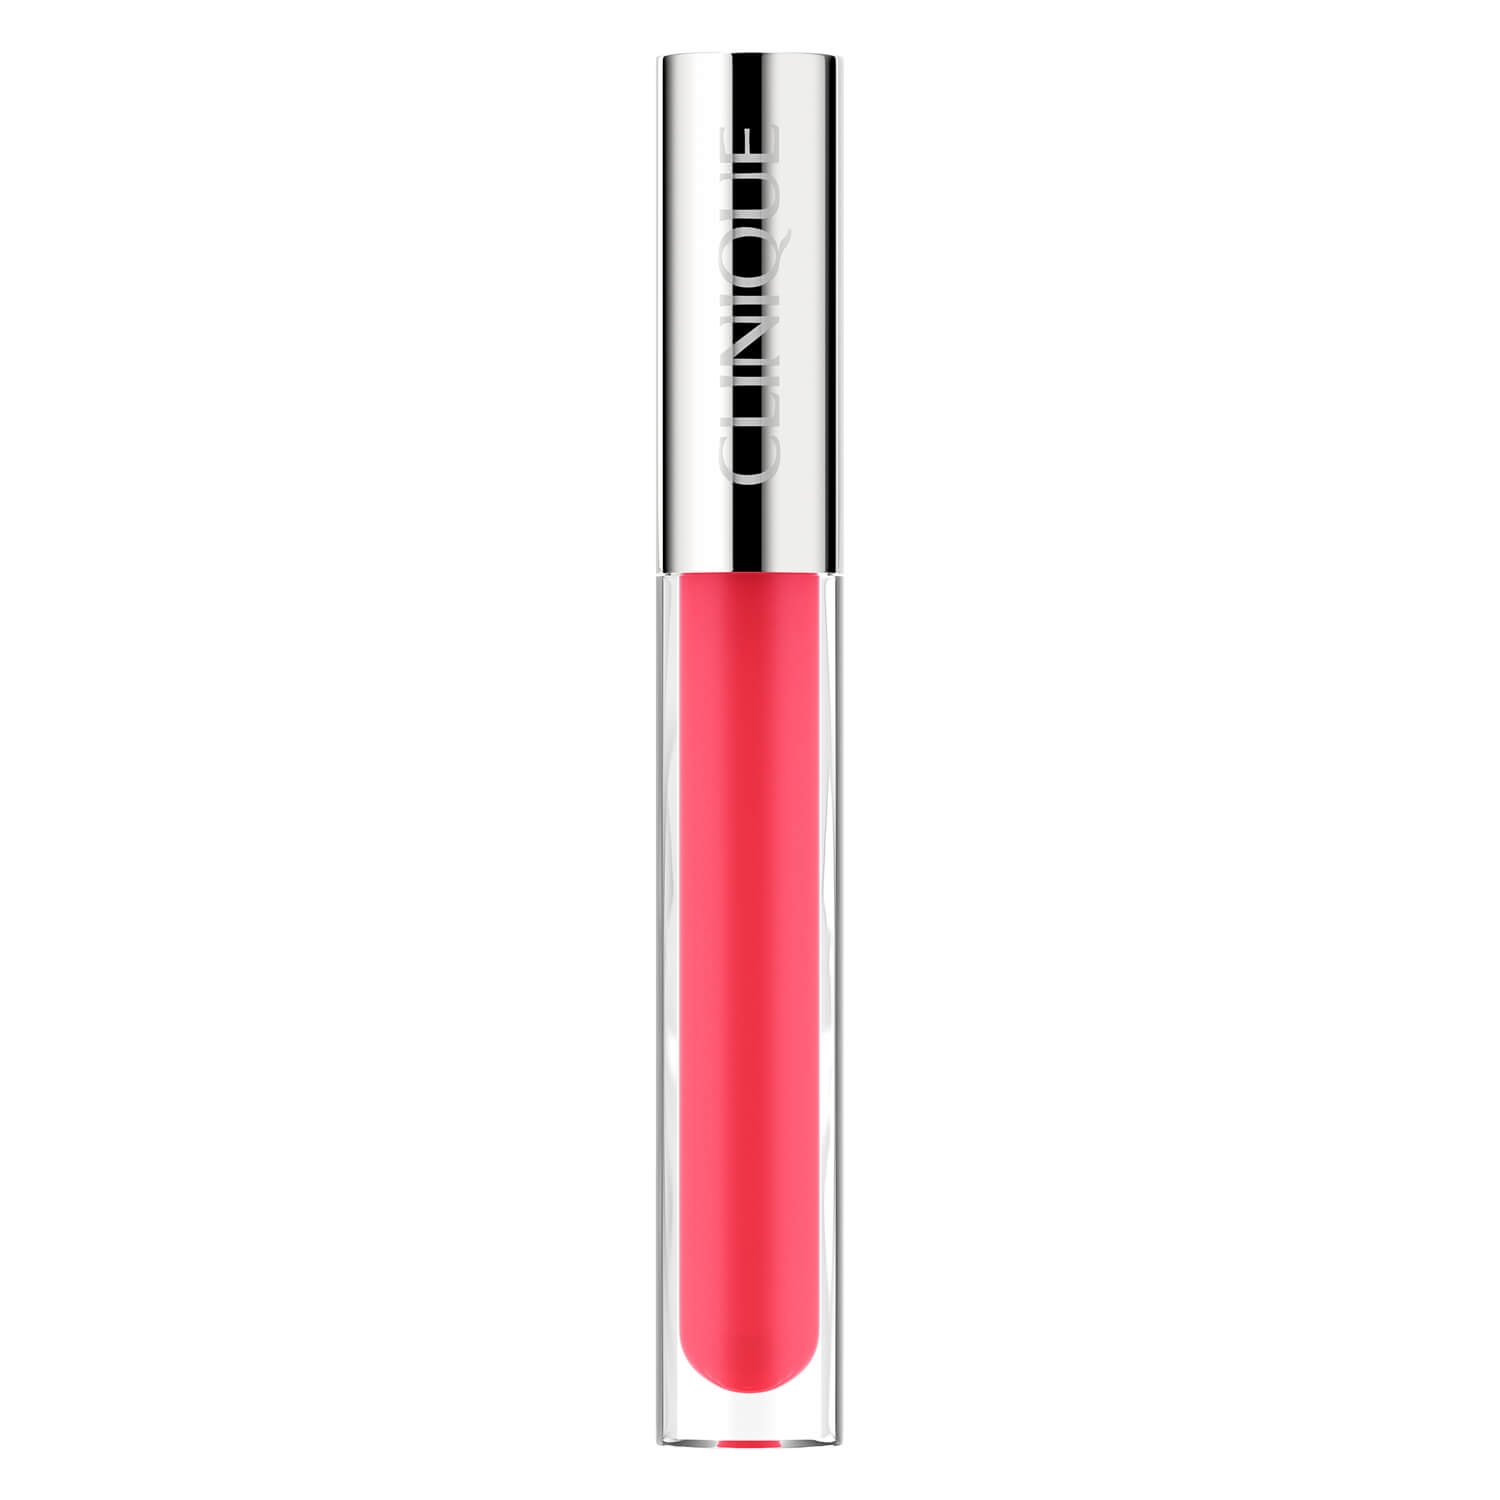 Product image from Clinique Lips - Pop Plush Creamy Lip Gloss 08 Strawberry Pop